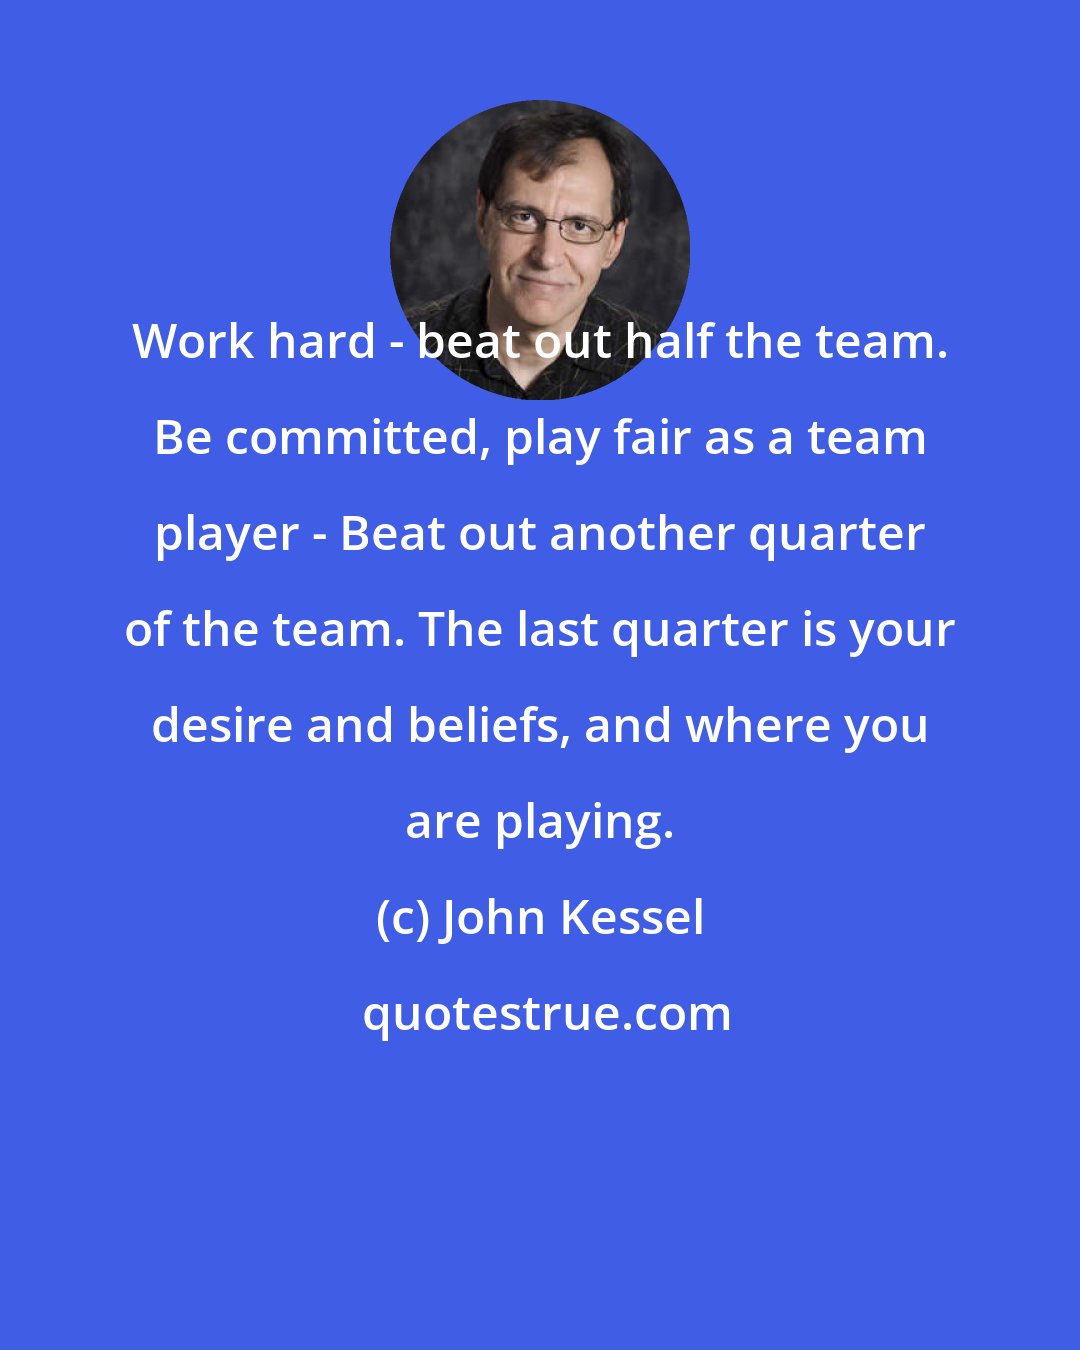 John Kessel: Work hard - beat out half the team. Be committed, play fair as a team player - Beat out another quarter of the team. The last quarter is your desire and beliefs, and where you are playing.